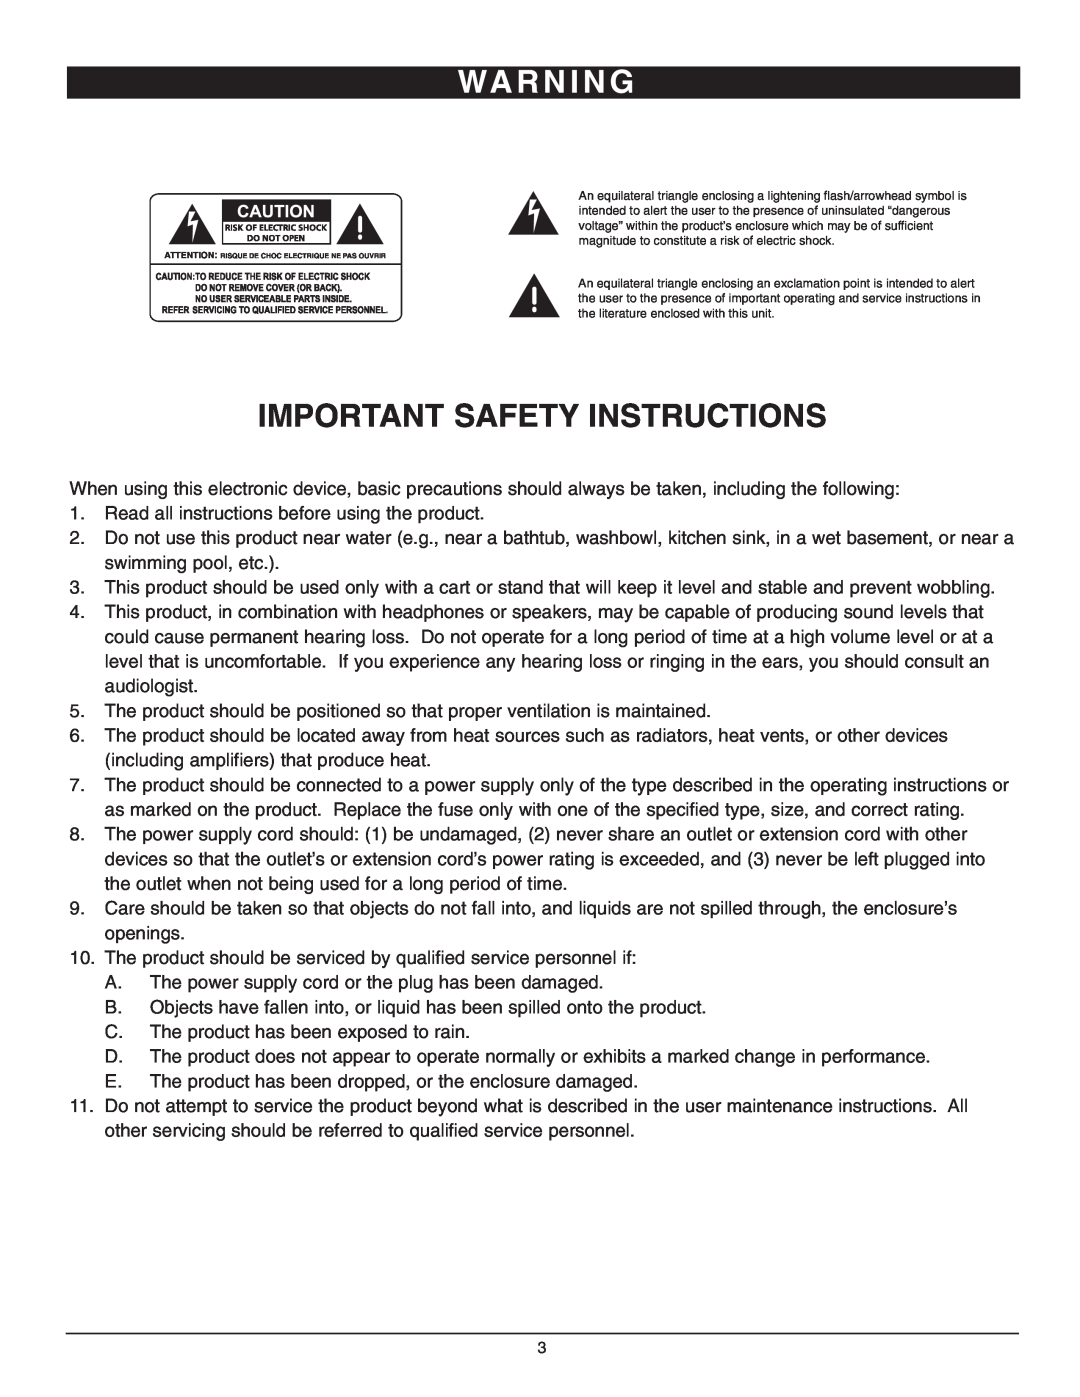 Nady Systems SMA-2130 owner manual Wa R N I N G, Important Safety Instructions 